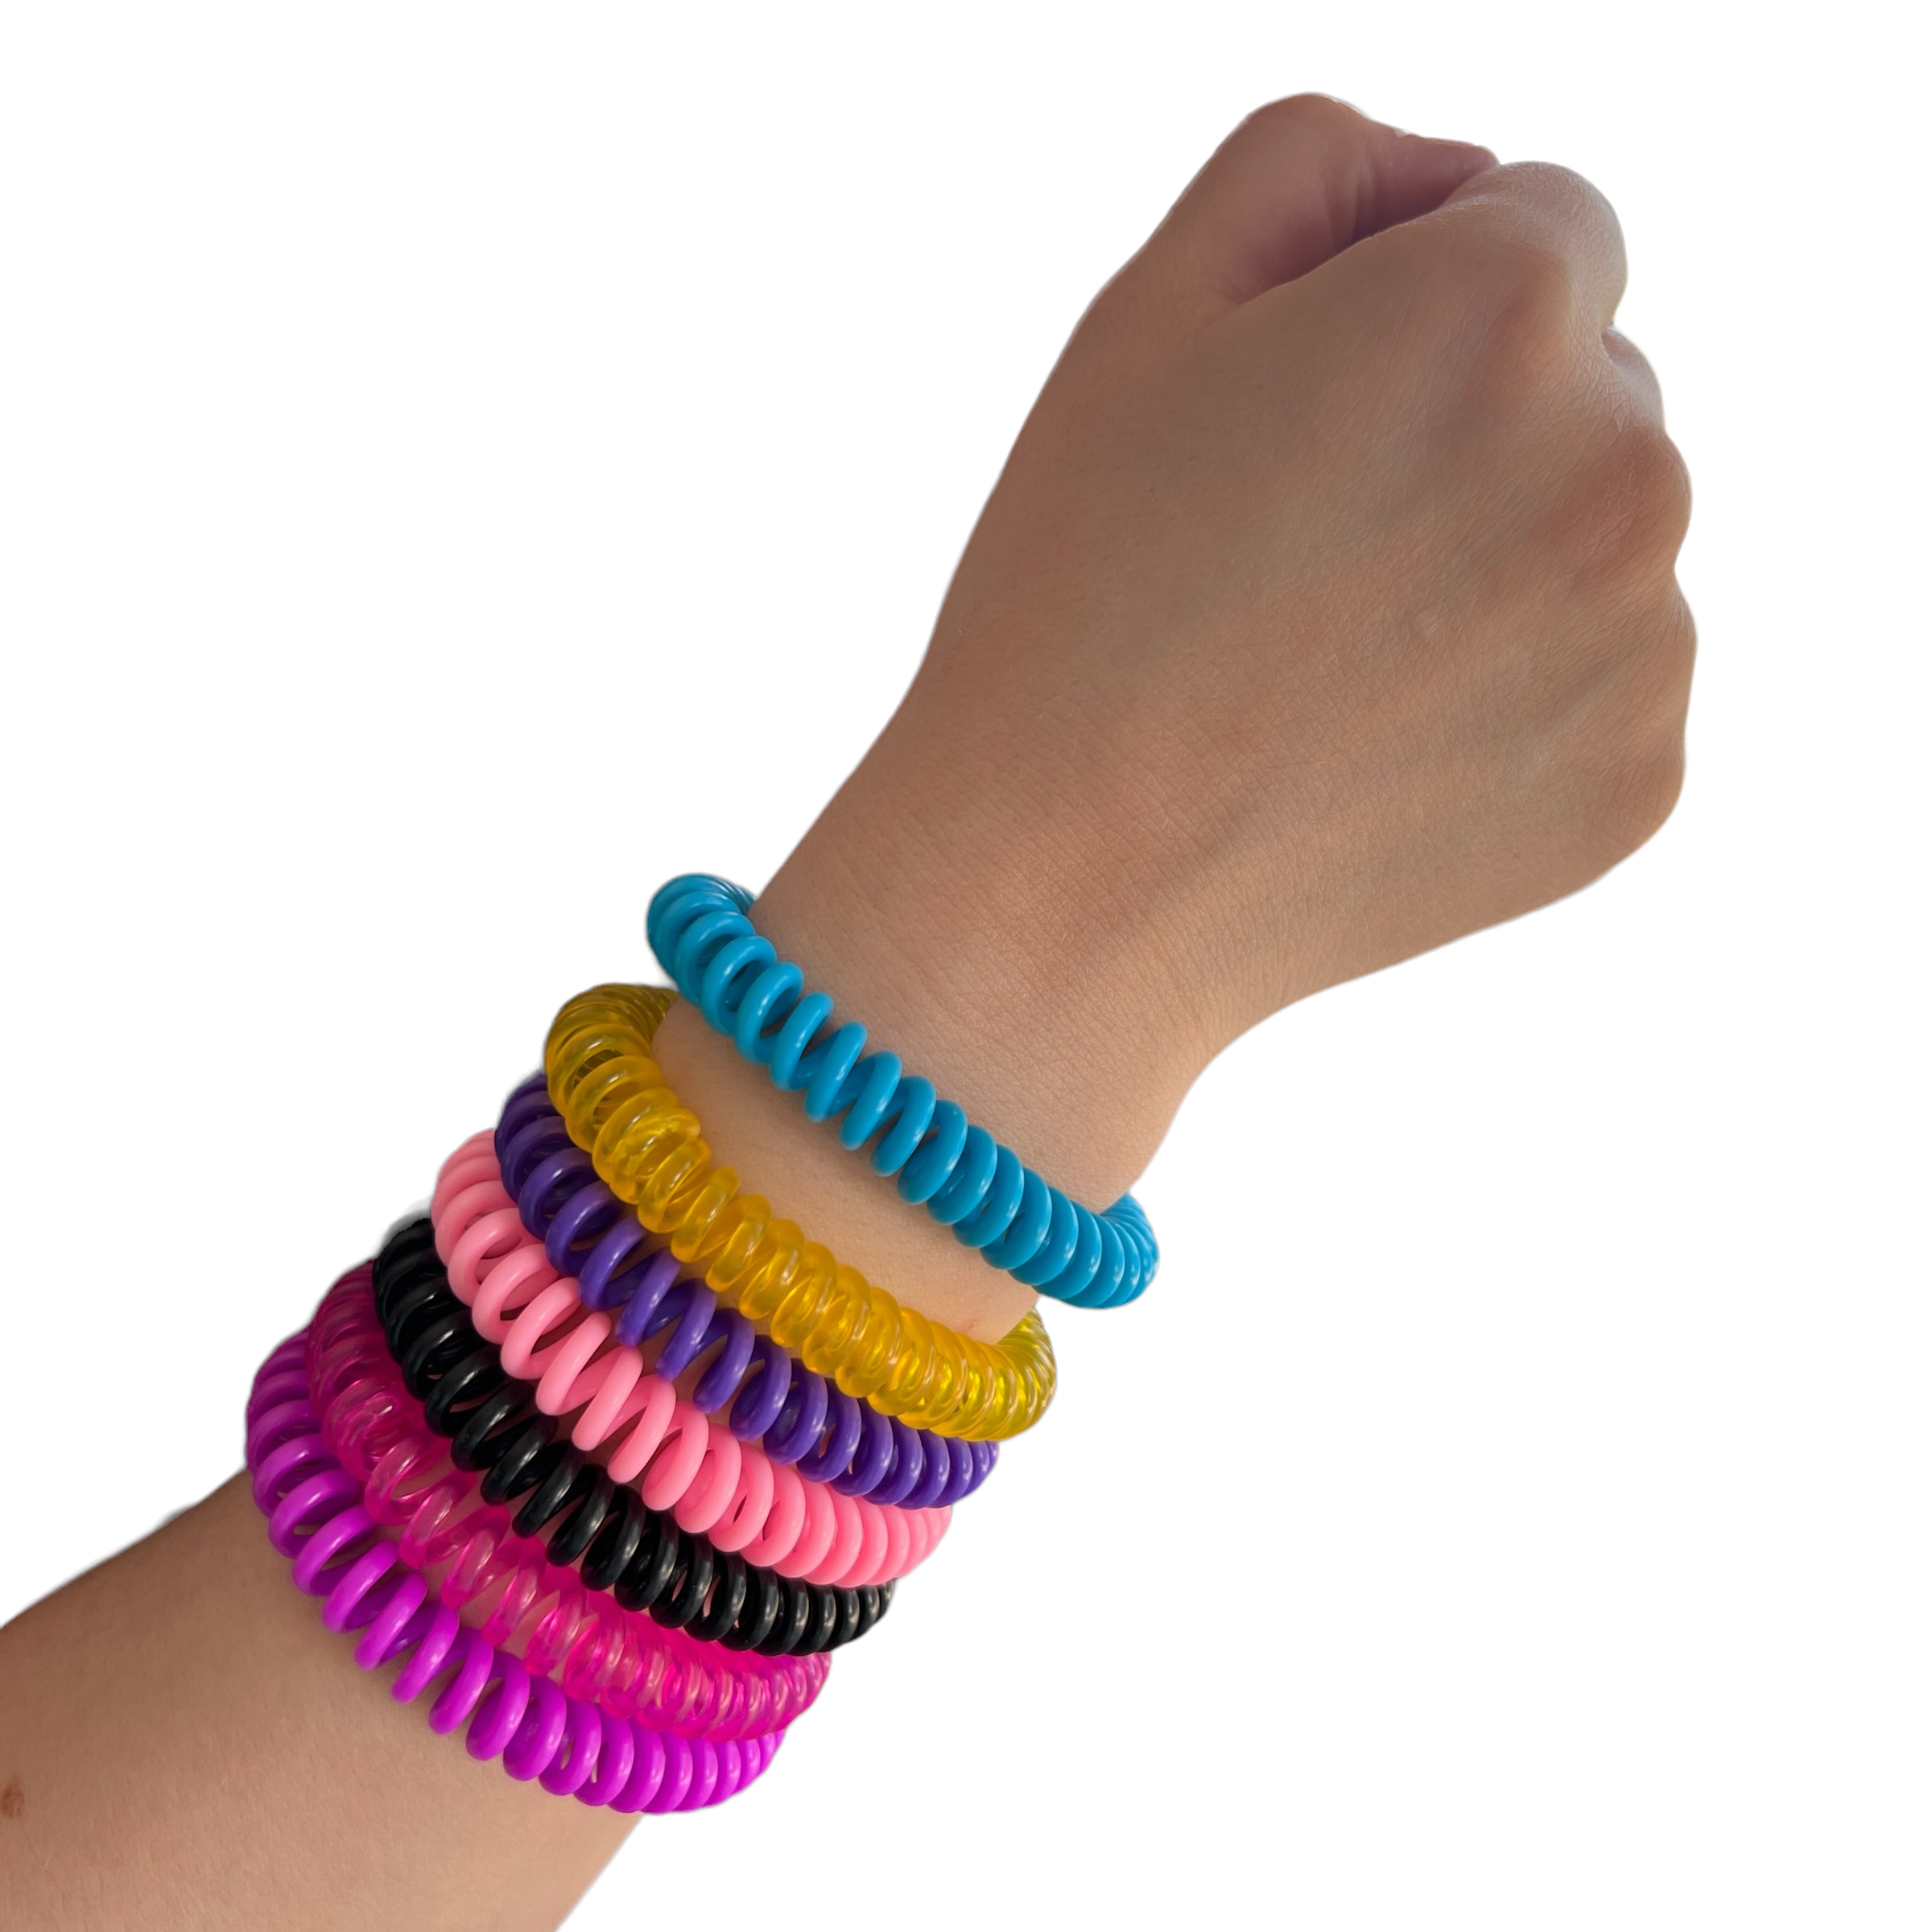 Testing the Parakito mosquito bracelet in the Amazon: Review